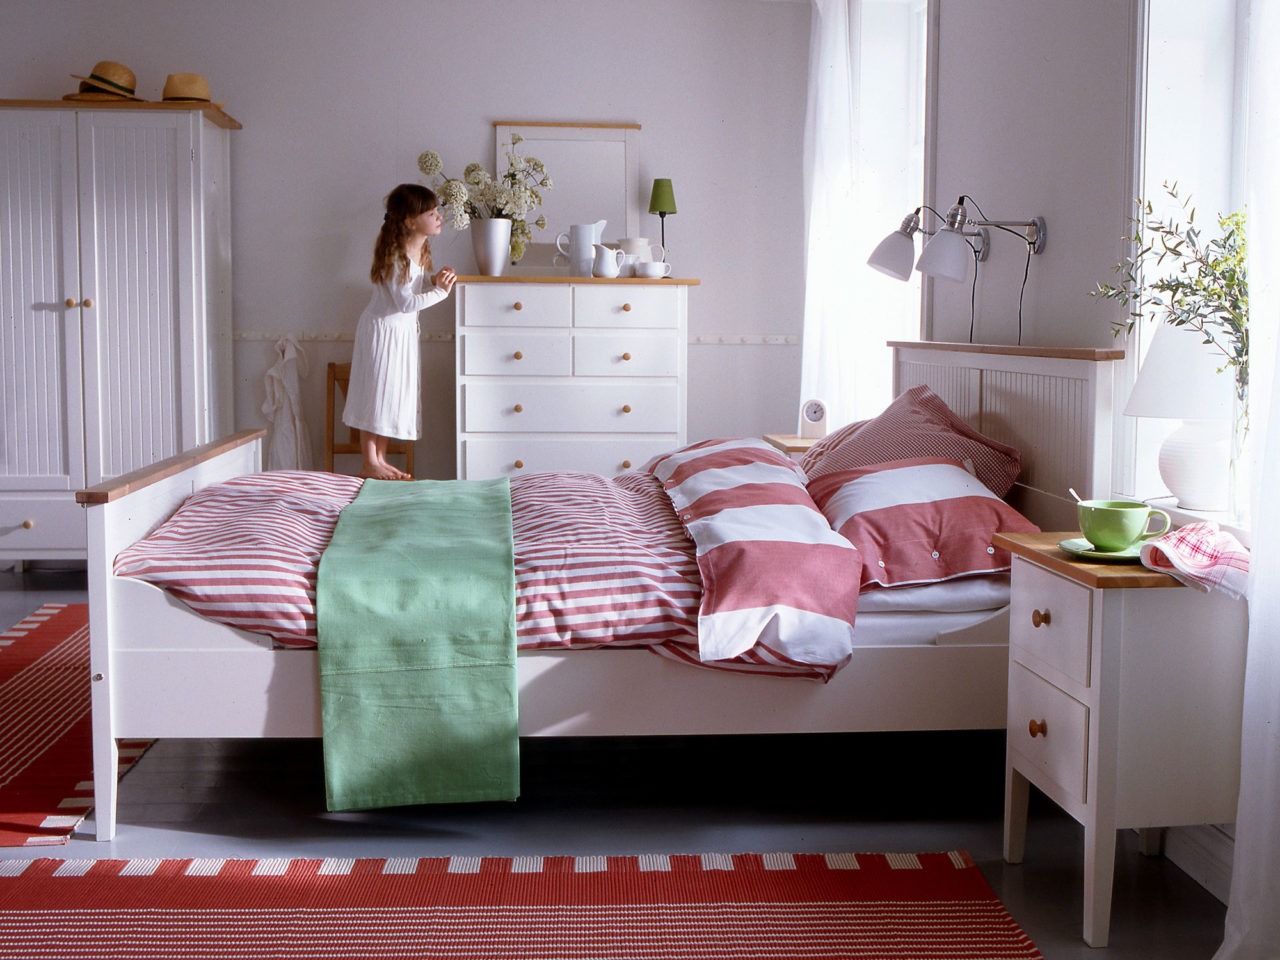 A girl standing on a chair looks out from a bedroom with furniture in all white, model VISDALEN, in a modern rustic style.